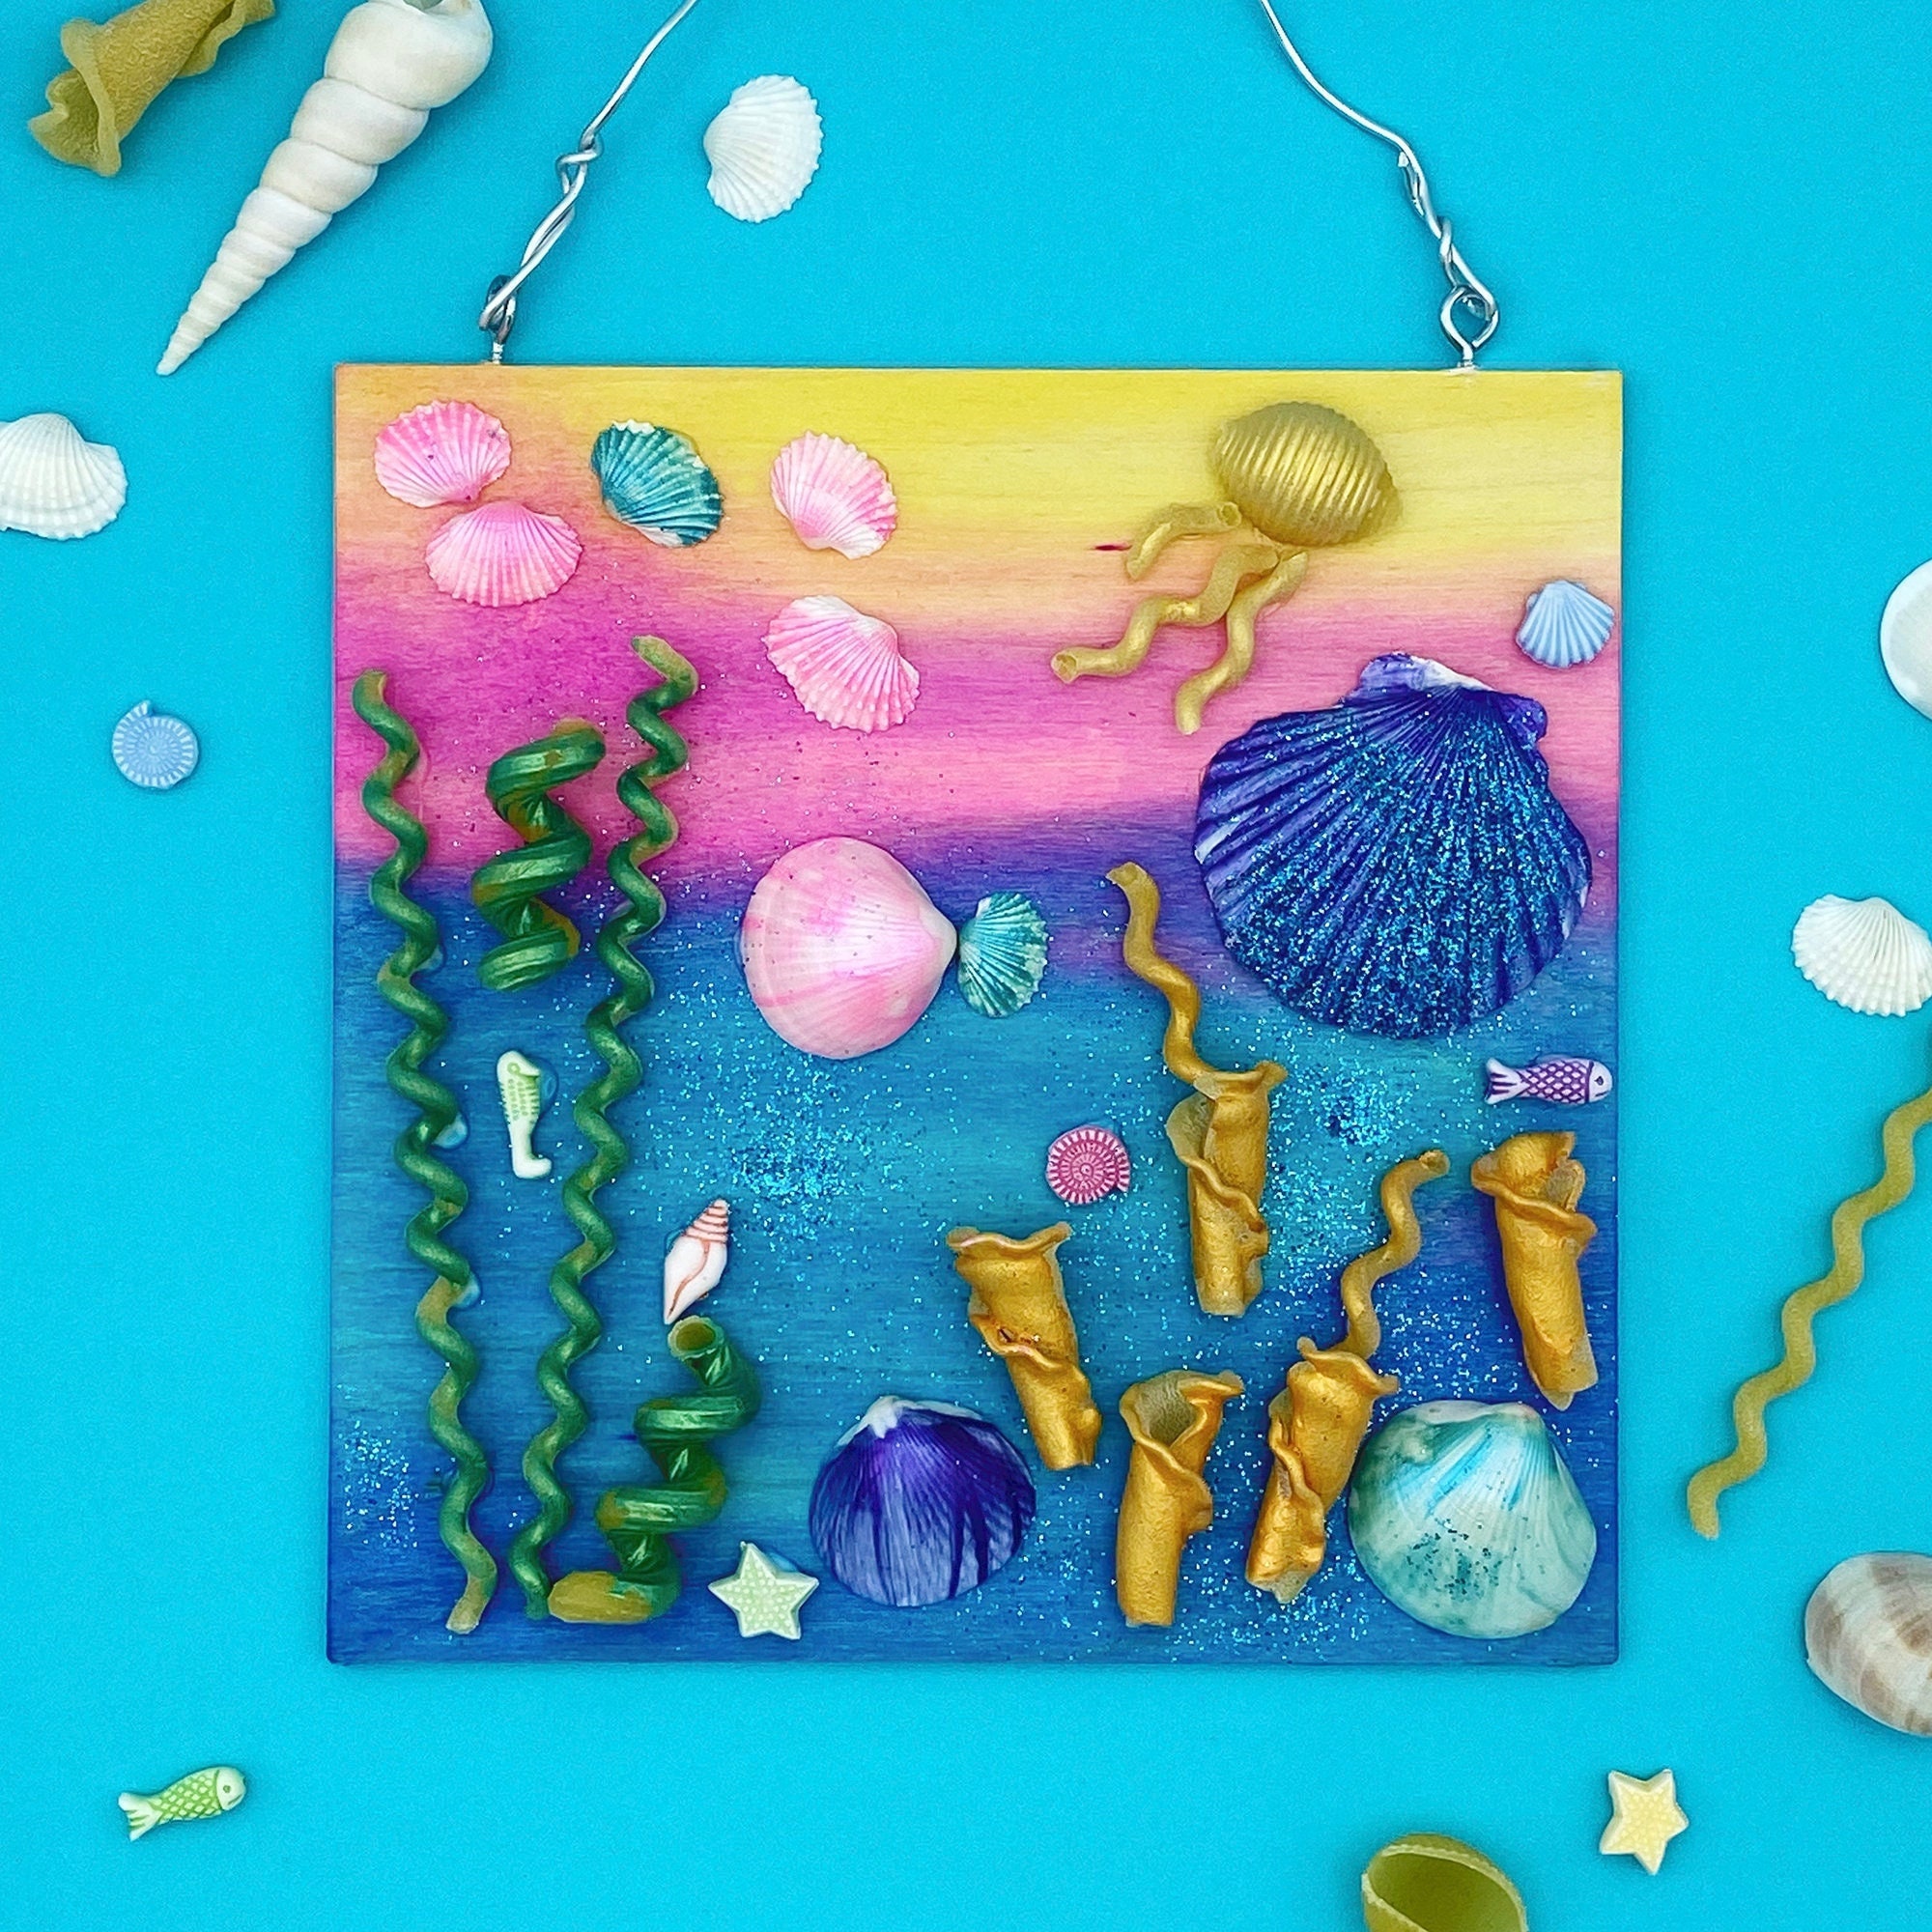 Shell Painting Kit-Arts and Crafts for Girls & Boys Ages 4-12 Craft Kits  Art Set with 10 Sea Shells & More Art Supplies Birthday Gifts Painting Toys  for 4 5 6 7 8 9 10 Year Old Kids Activities